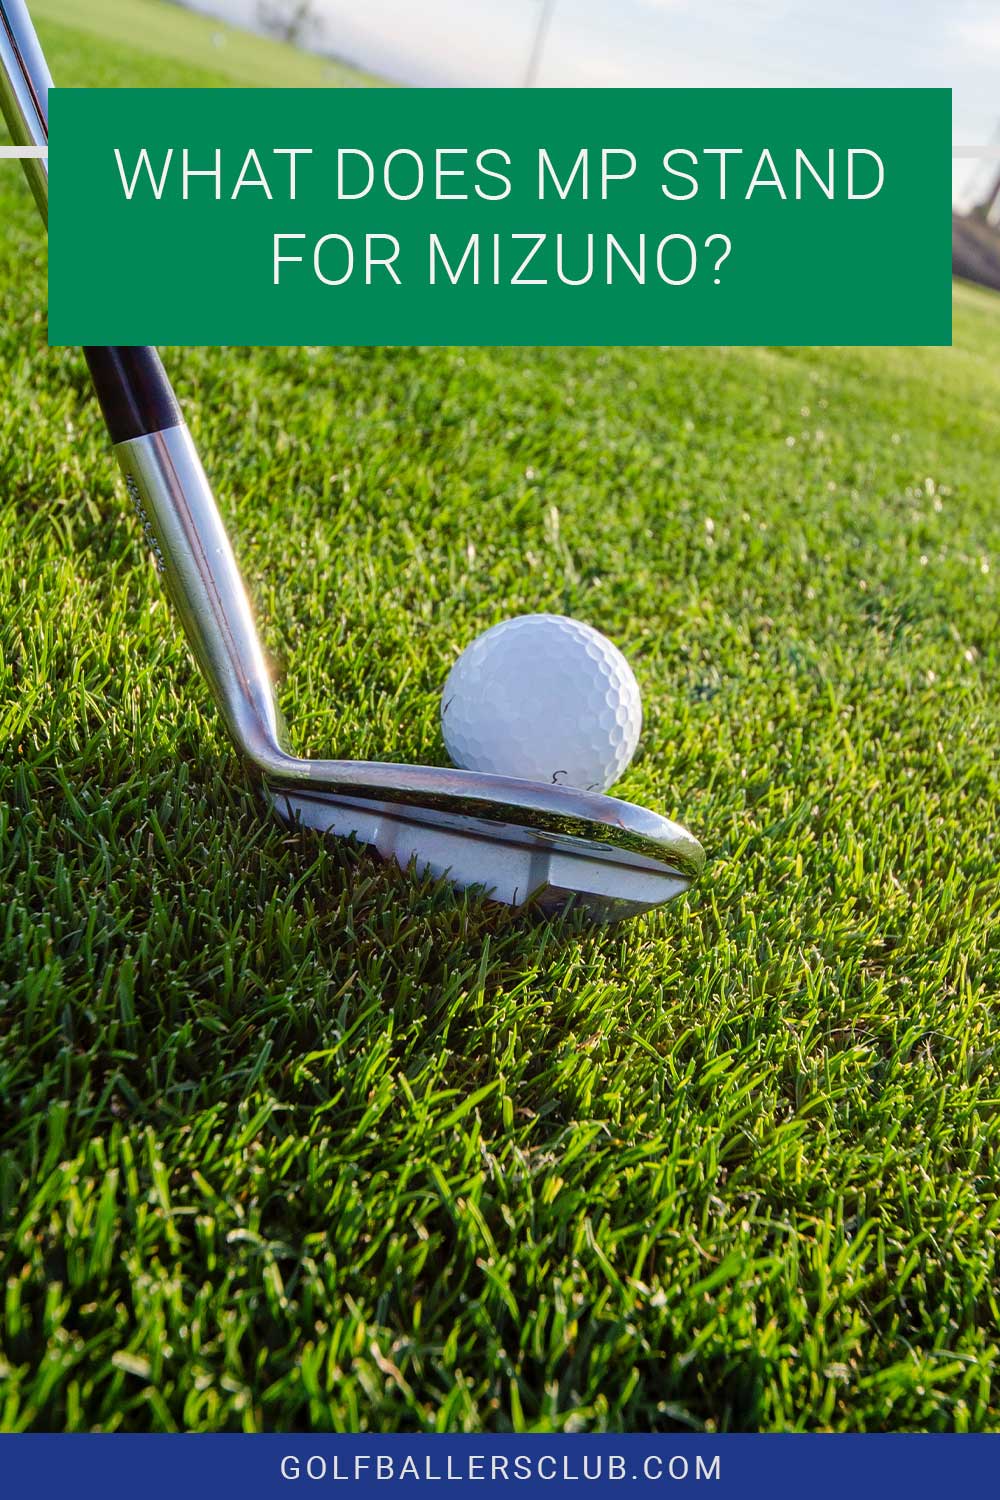 A golf iron touching a golf ball on green grass - What Does MP Stand For Mizuno?